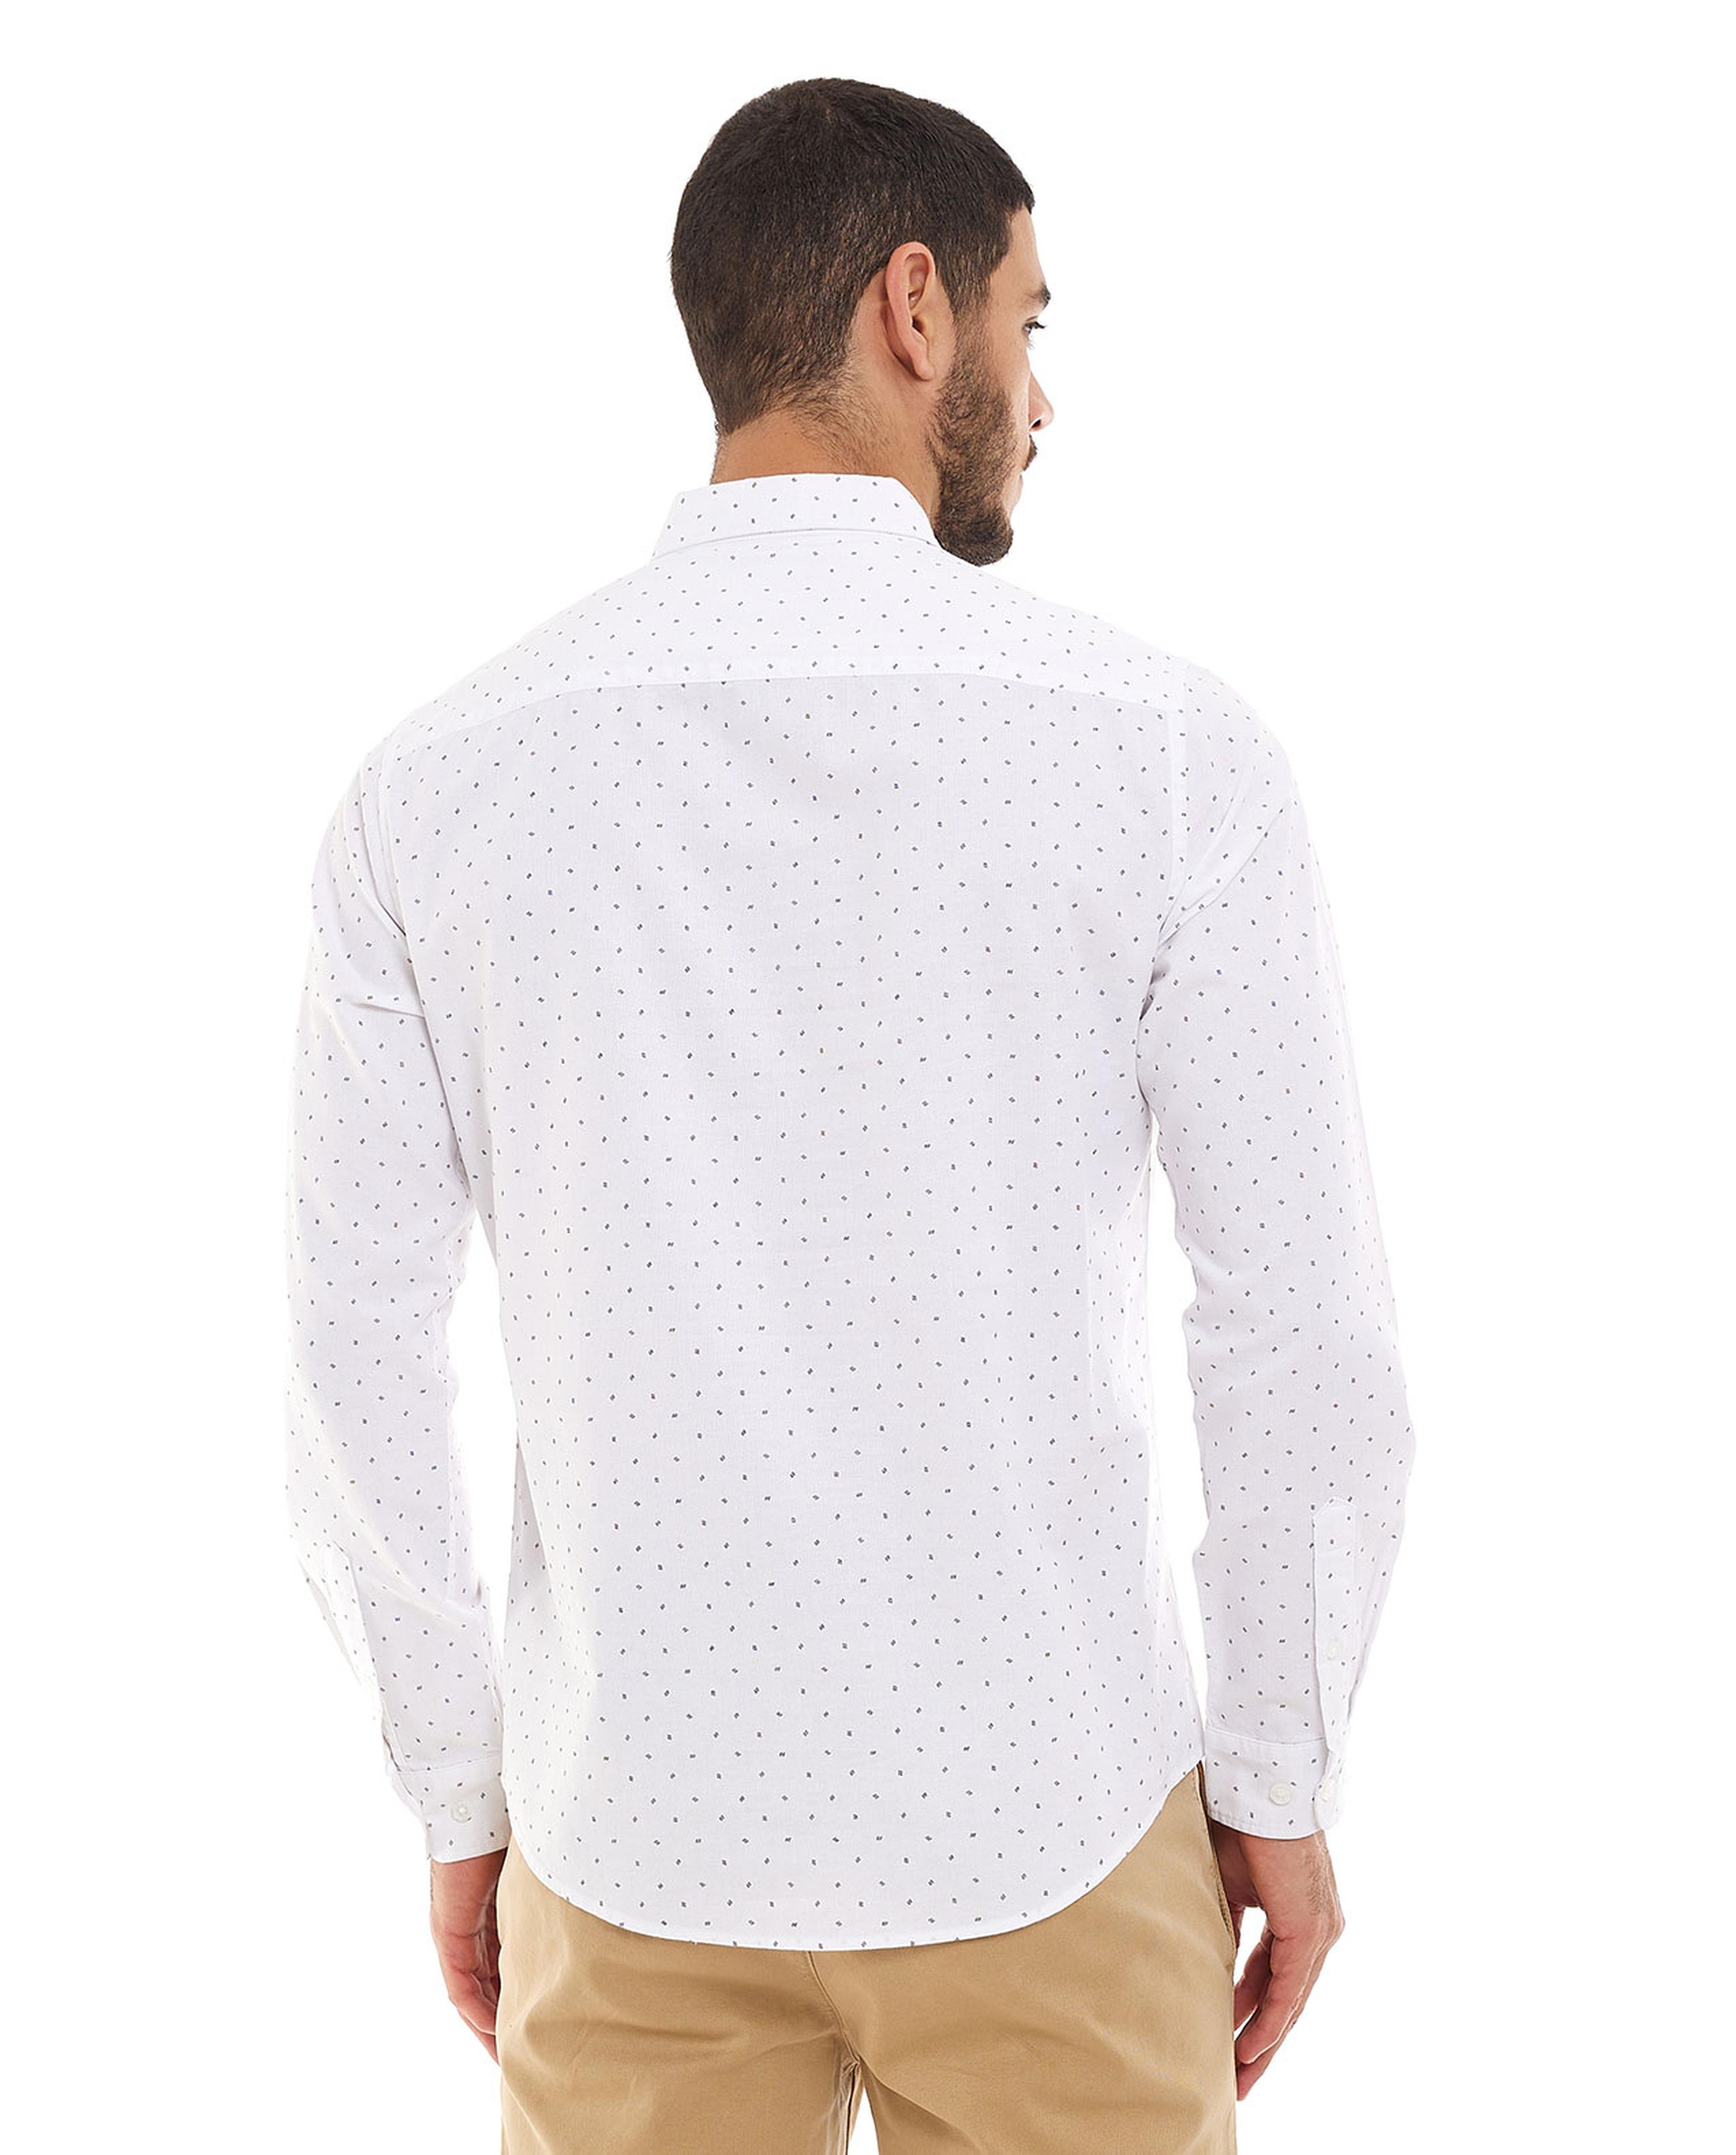 Polka Dots with Button-Down Collar and Long Sleeves